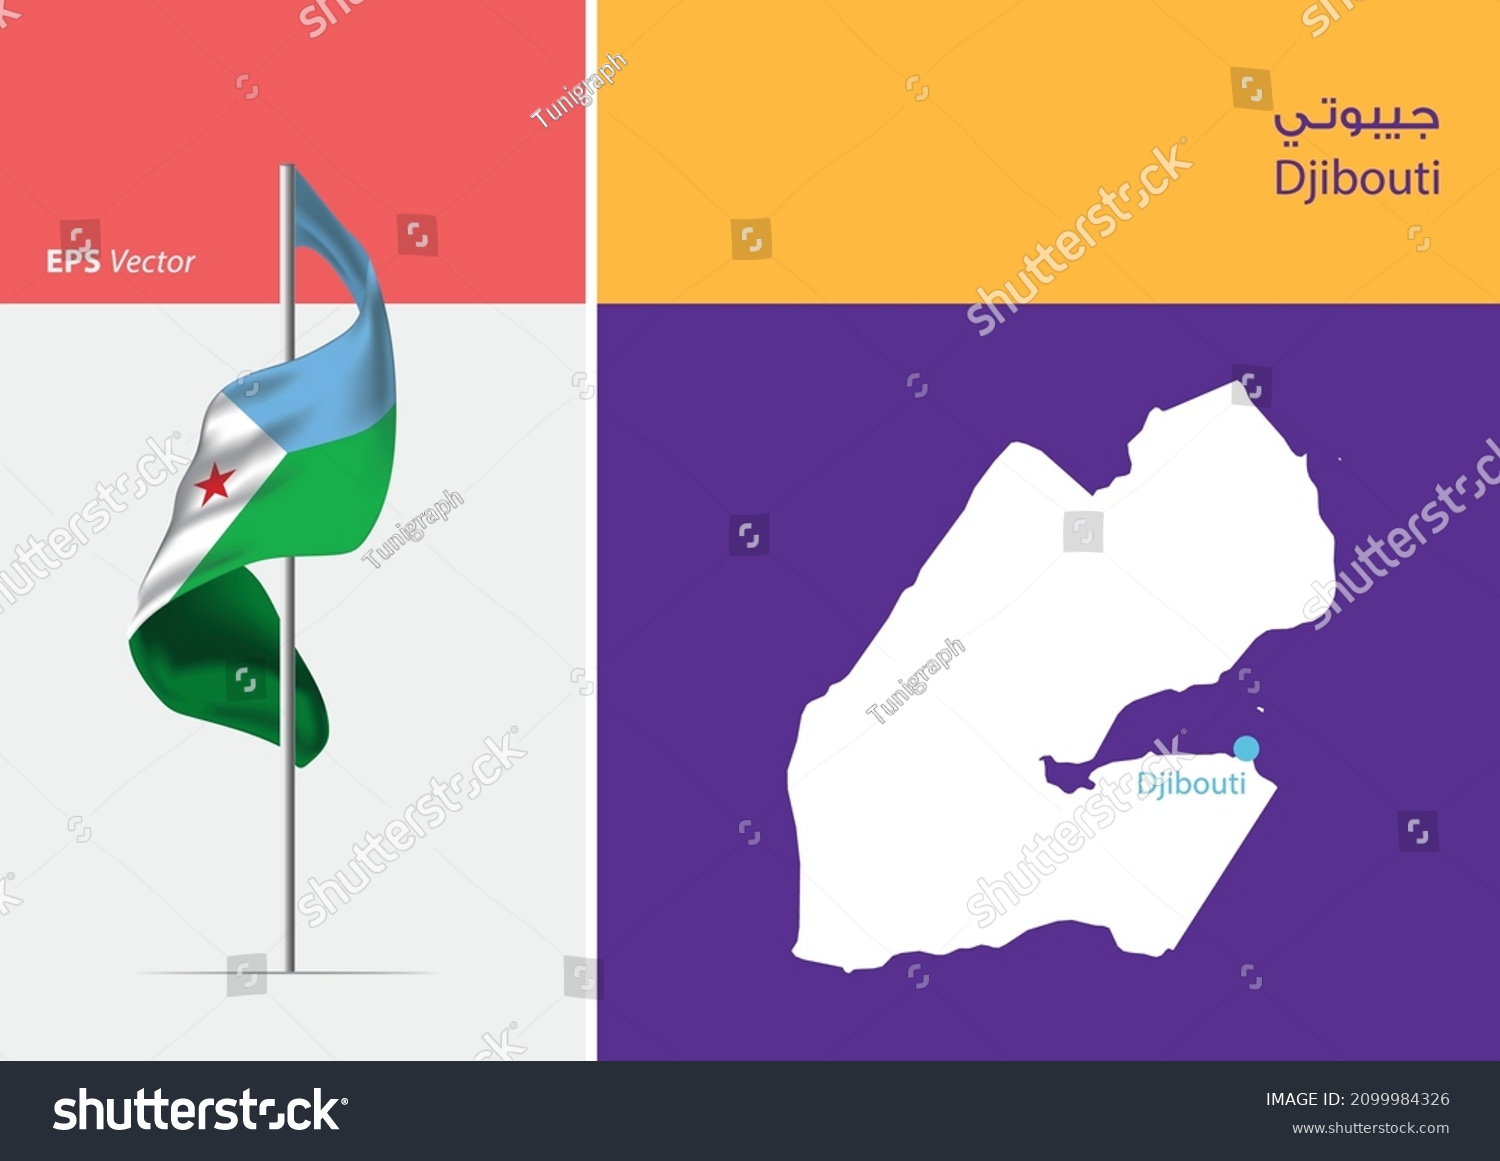 SVG of Flag of Djibouti on white background. Map of Djibouti with Capital position - Djibouti. The script in arabic means Djibouti svg